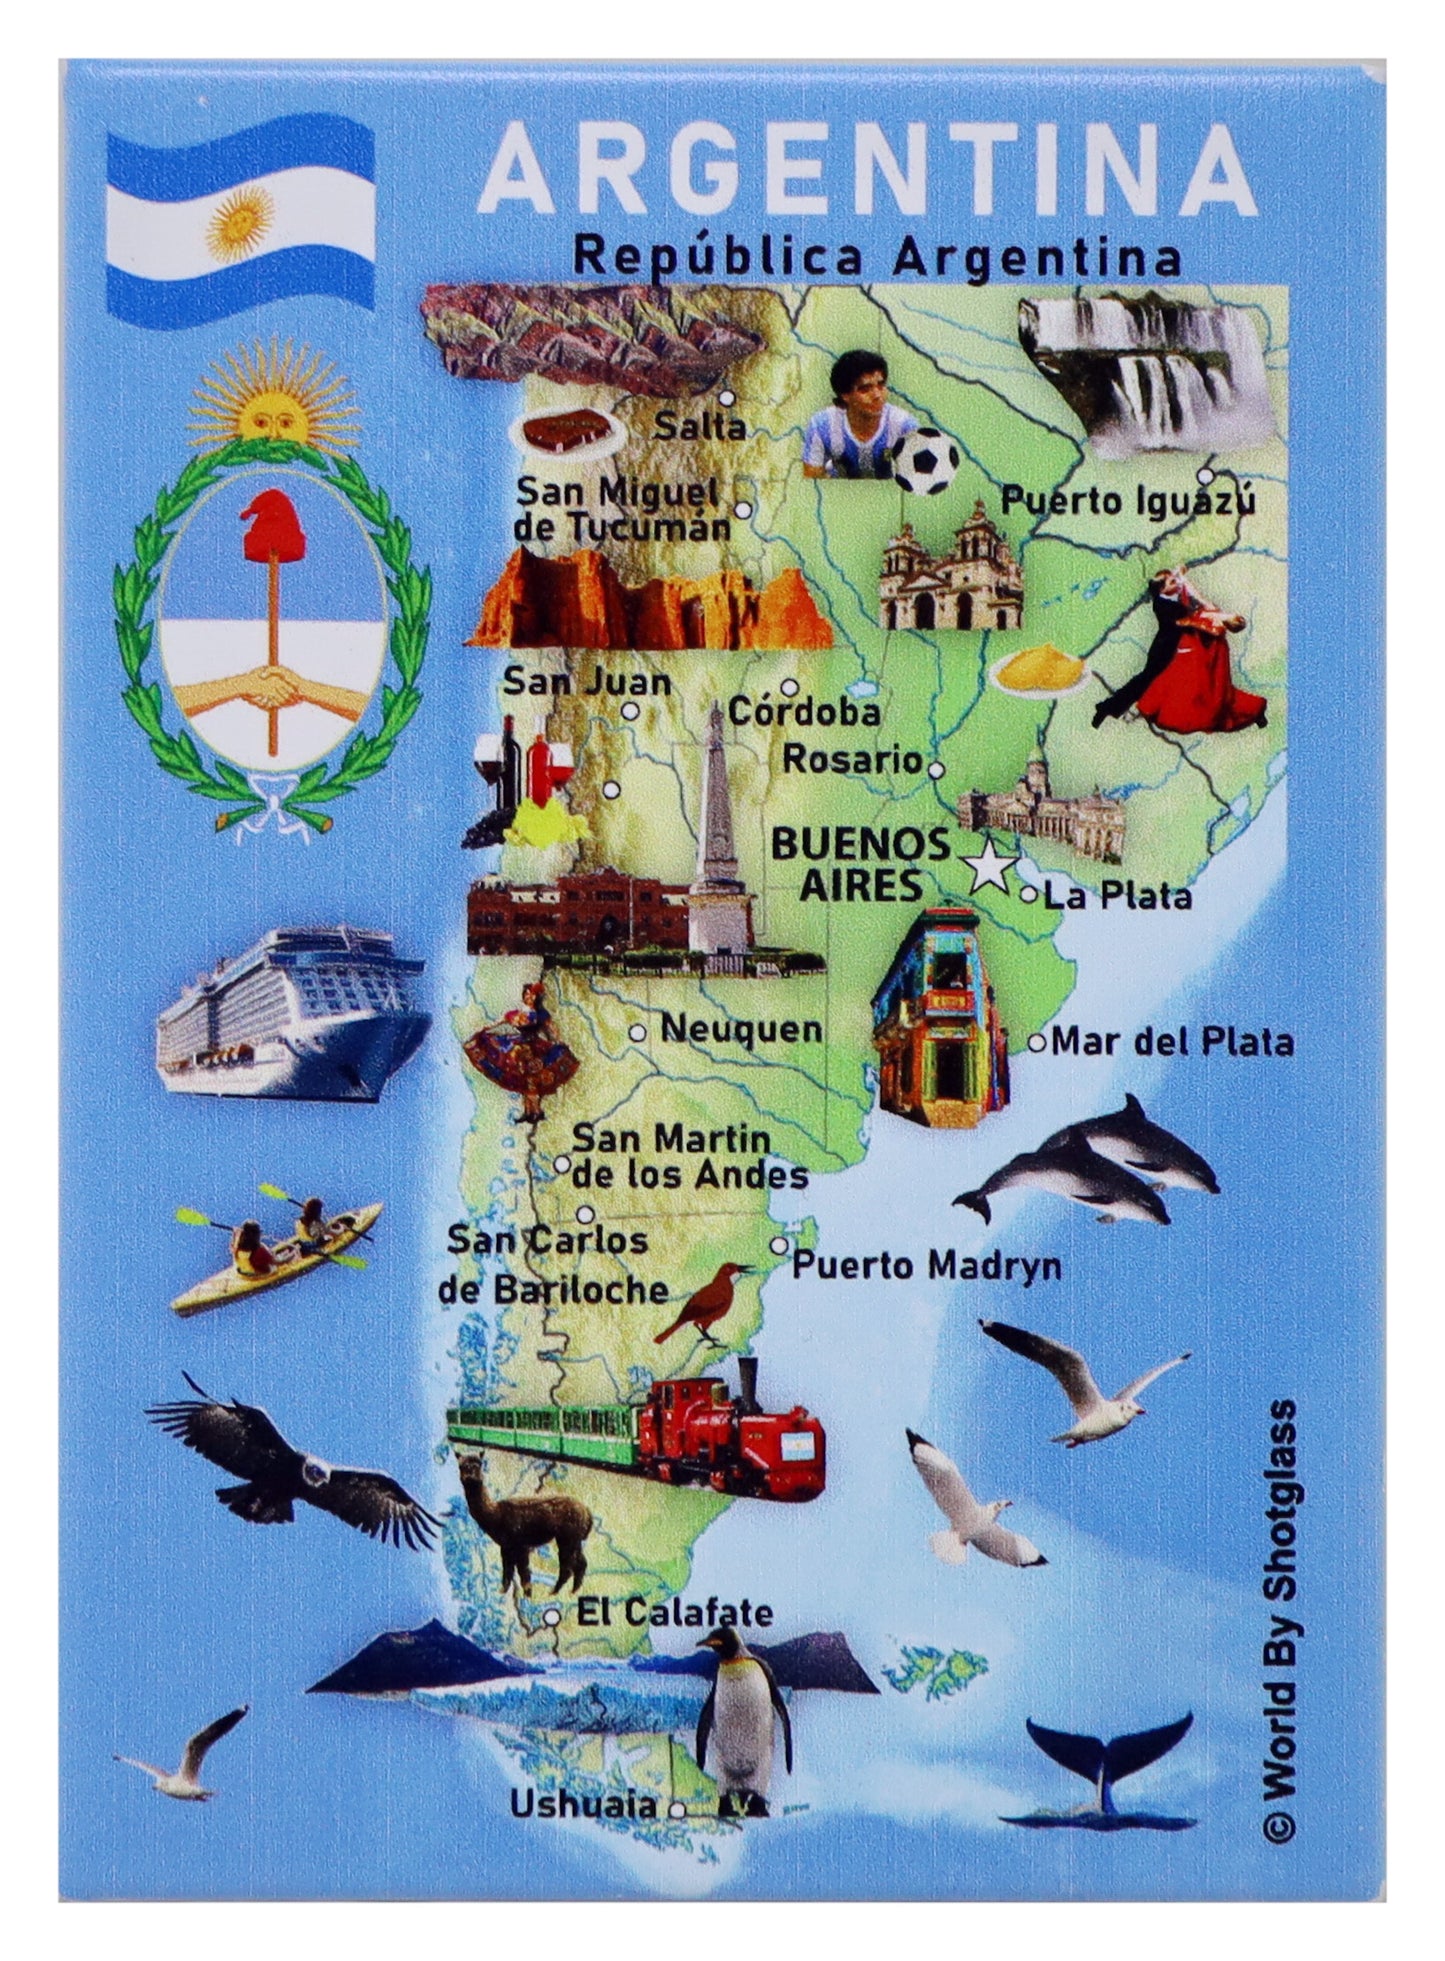 Argentina Graphic Map and Attractions Souvenir Fridge Magnet 2.5 X 3.5